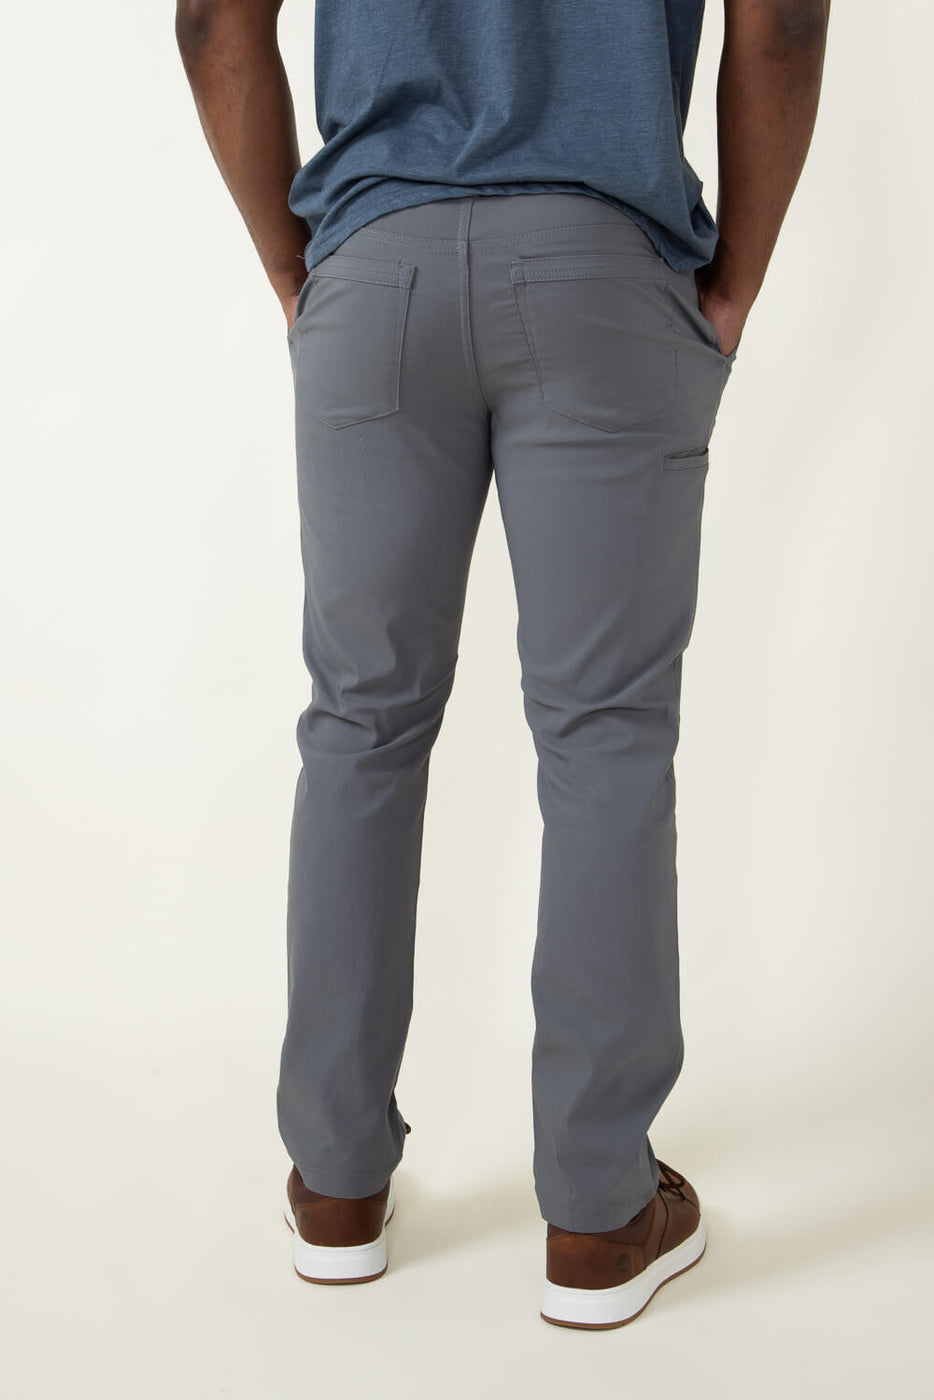 Weatherproof Vintage Faille Pants for Men in Graphite | W3F800 